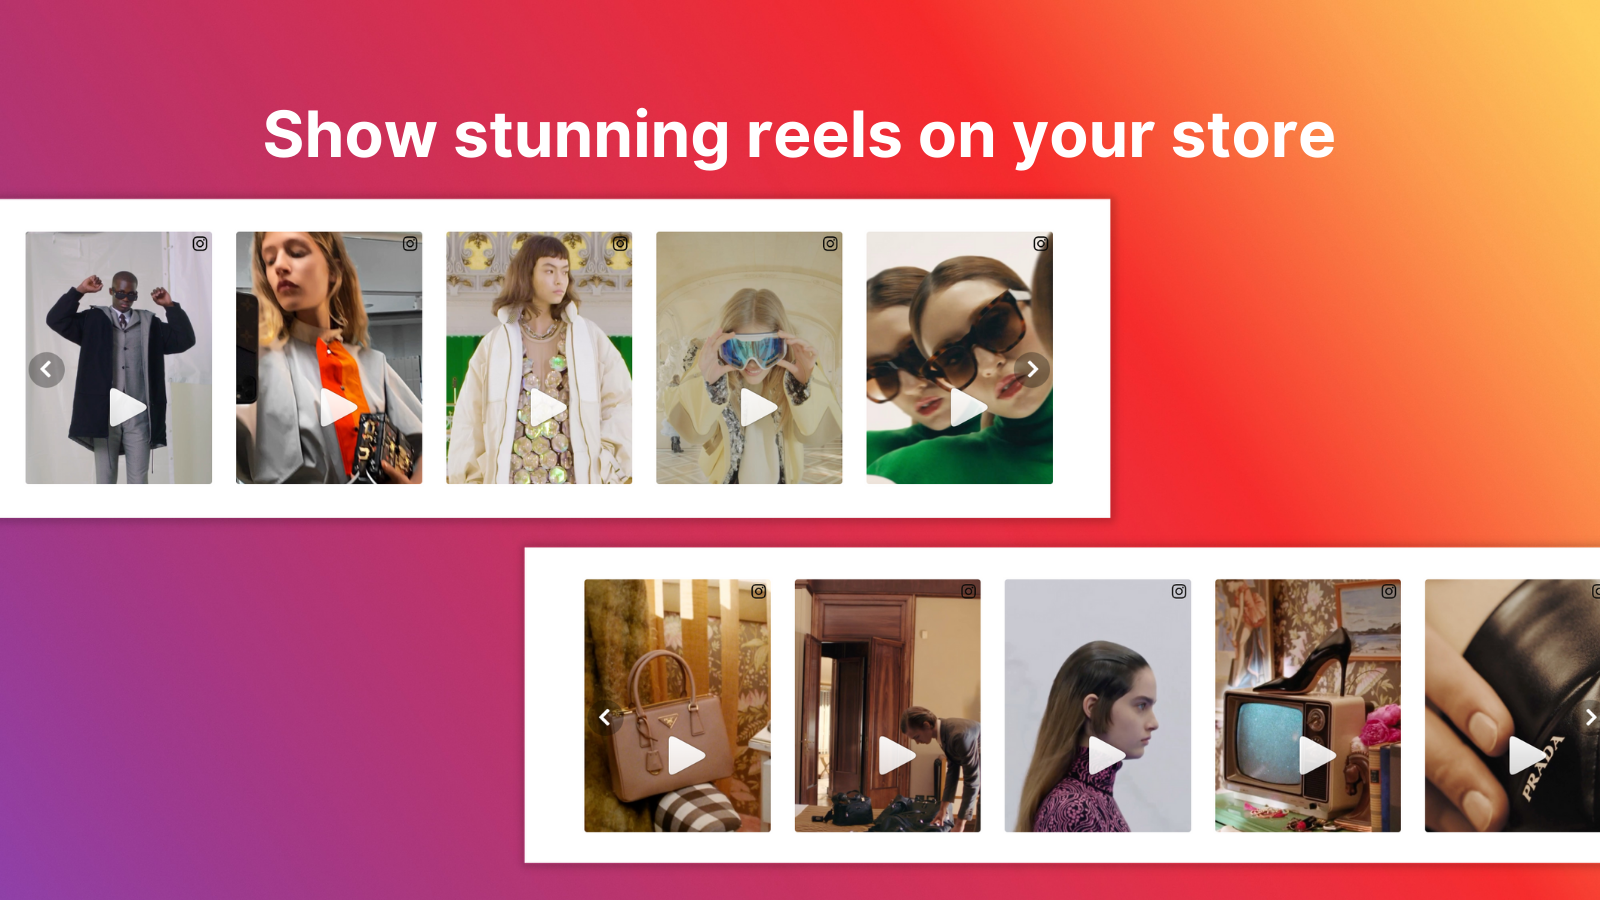 Show stunning reels on your store